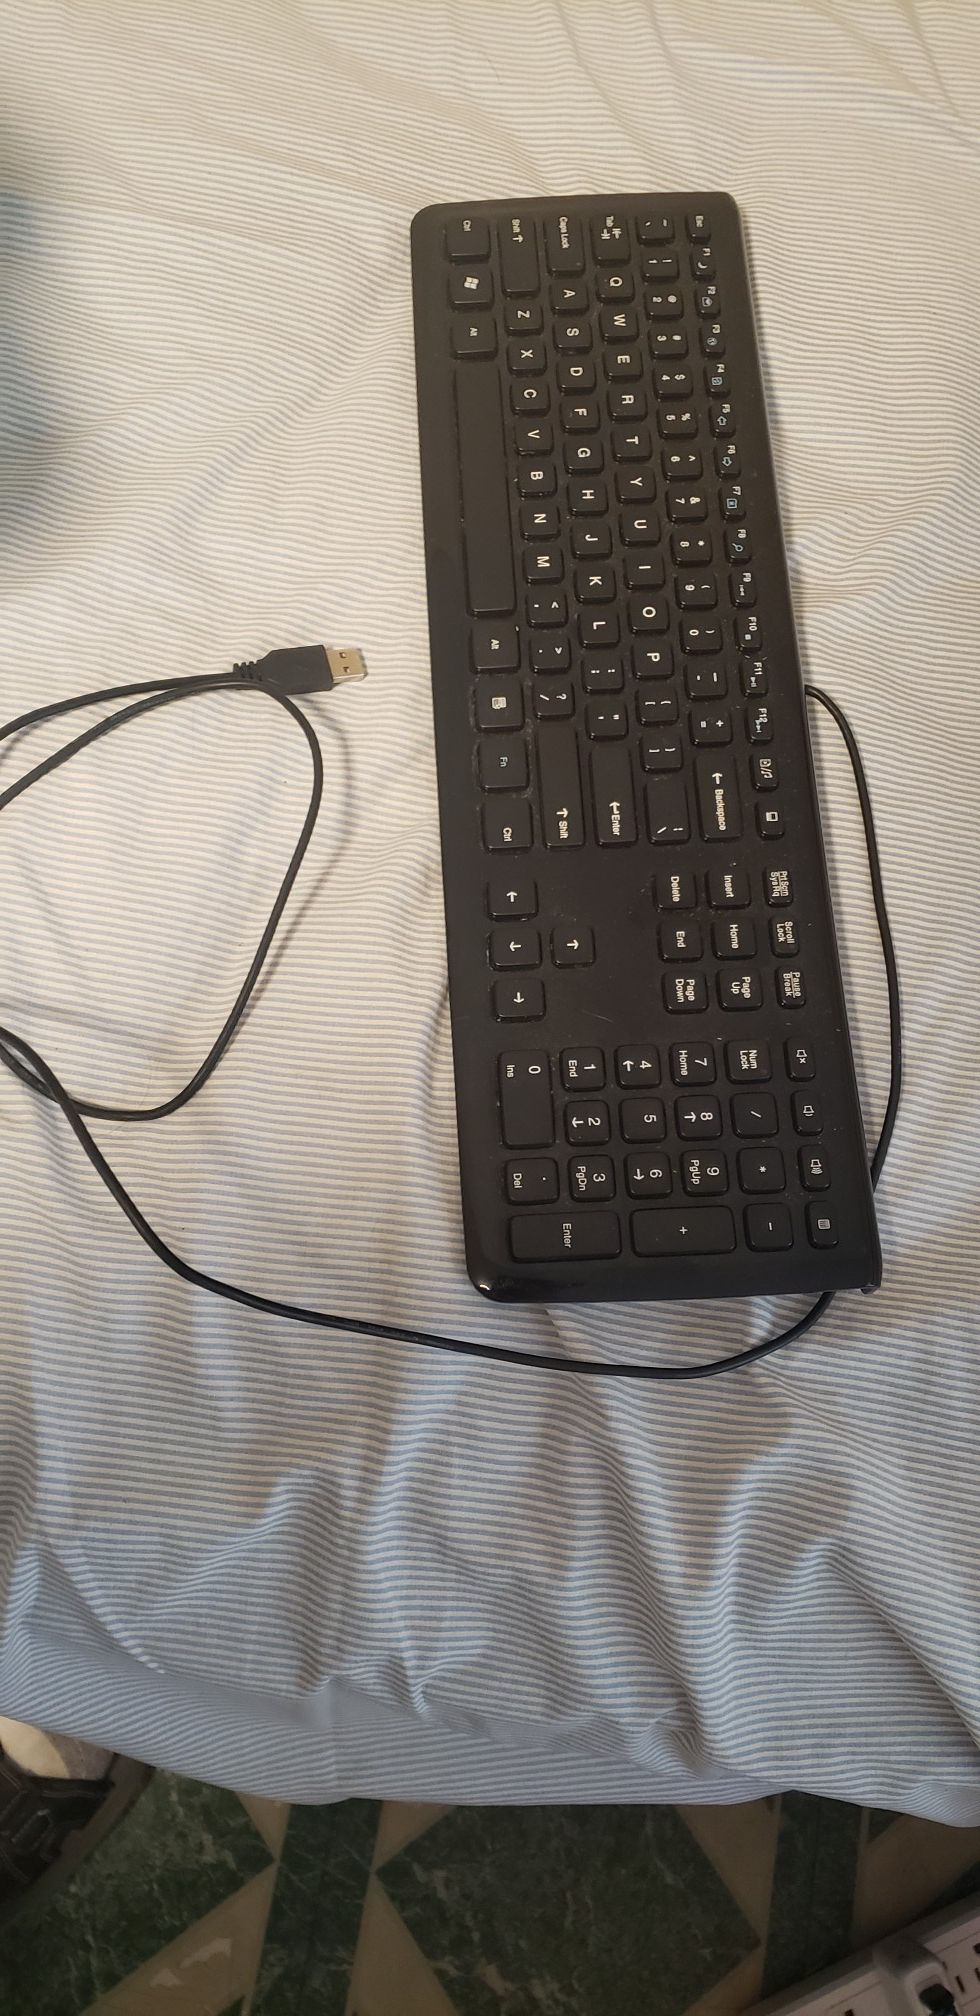 FREE keyboard, in good condition, works perfectly